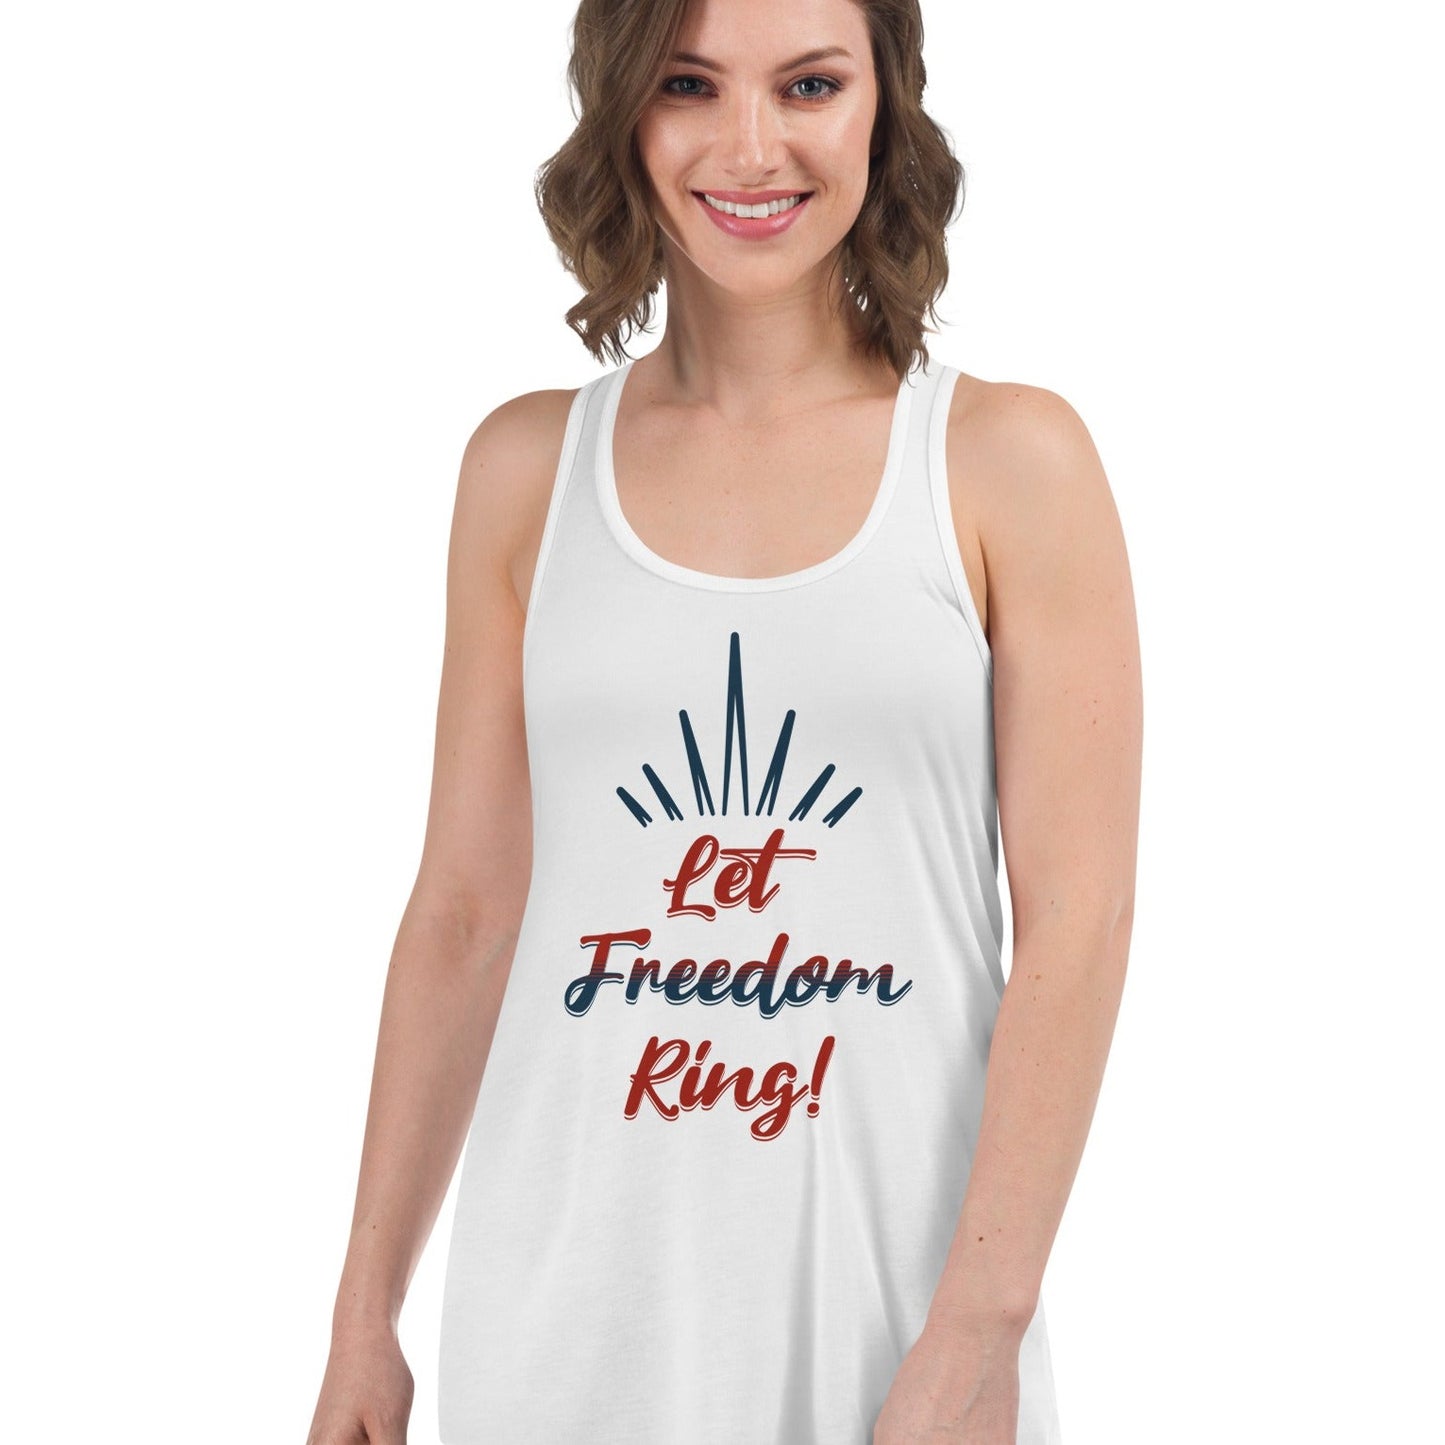 ADULT Women's "Let Freedom Ring!" Patriotic July 4th Independence Day Flowy Racerback Tank